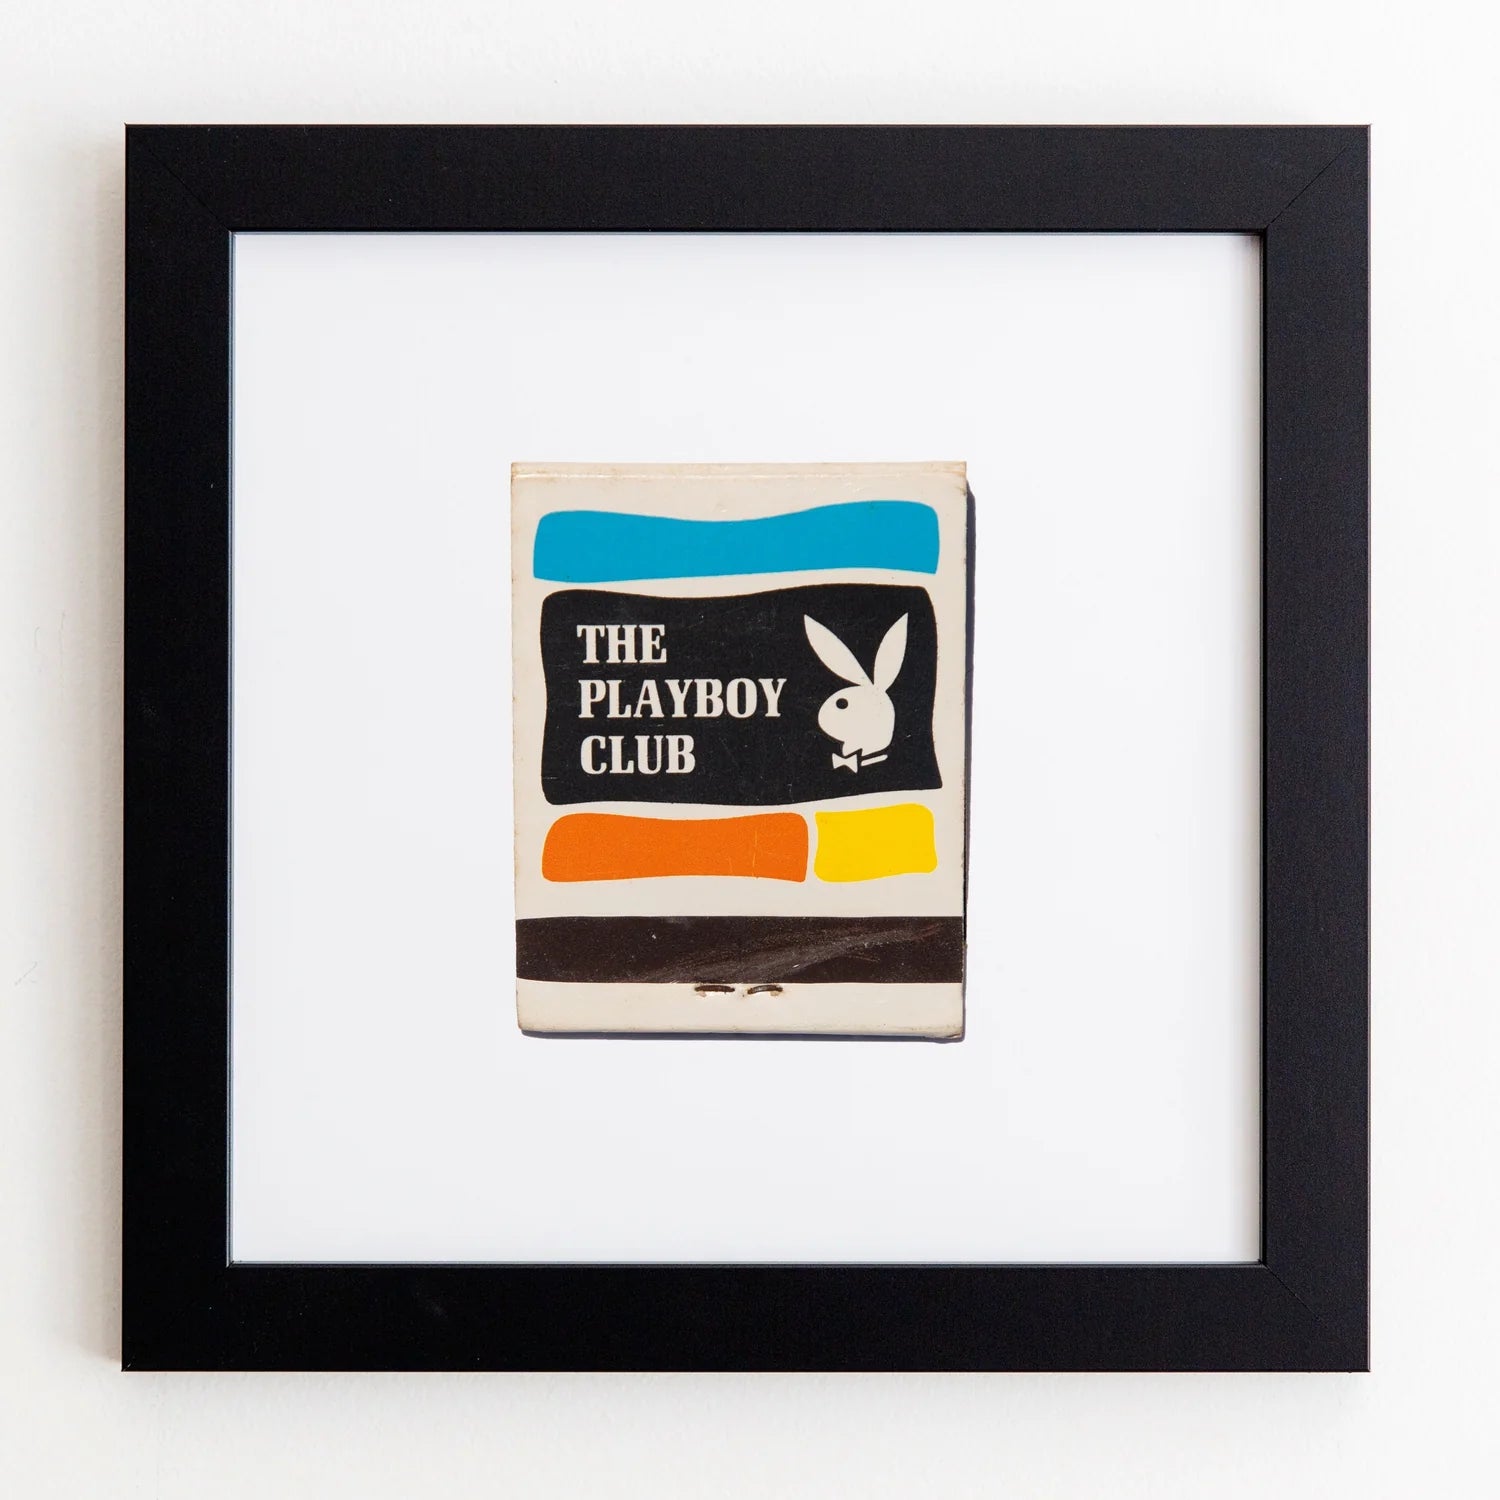 A framed vintage Match South matchbook cover, featuring the iconic Playboy bunny logo and horizontal stripes in blue, black, and orange, mounted on a white background within an Art Square Black Frame.